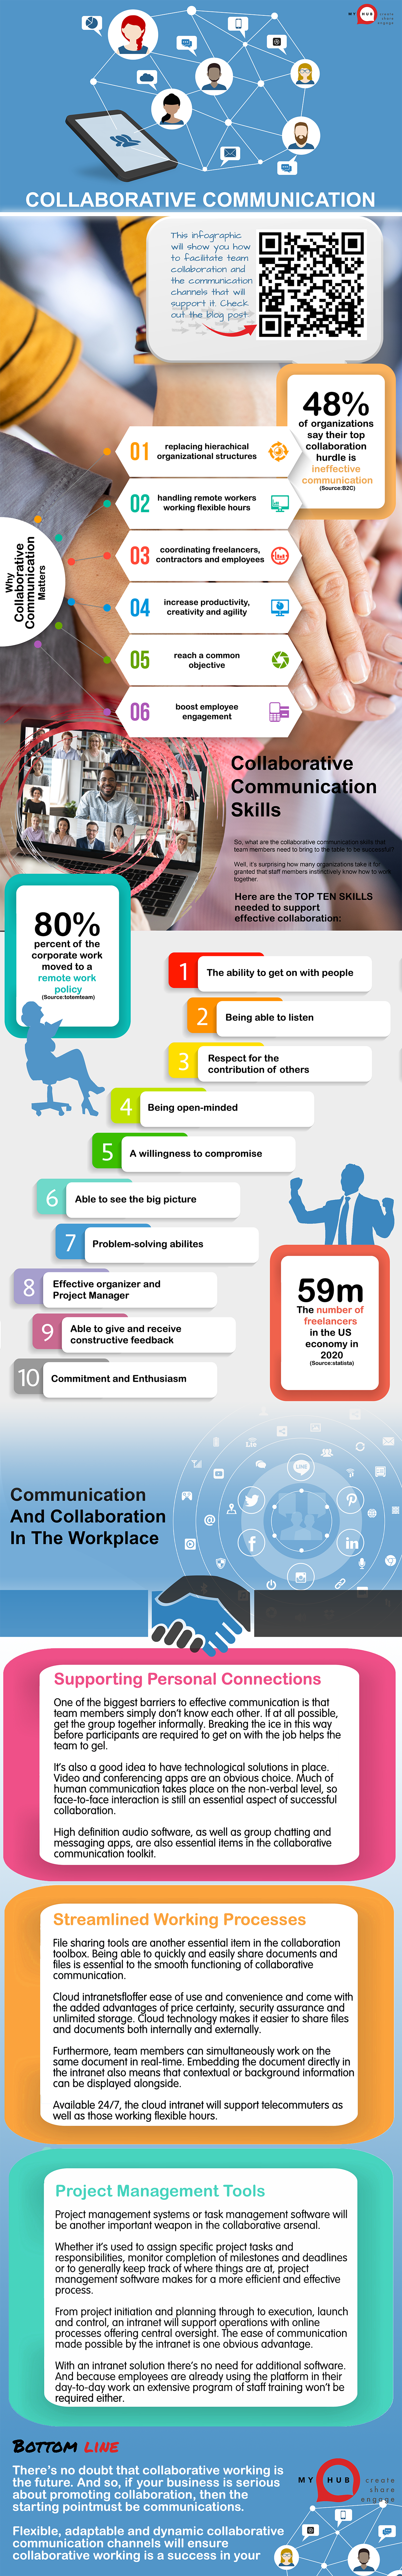 Collaborative-Communication-Infographic-High-Res